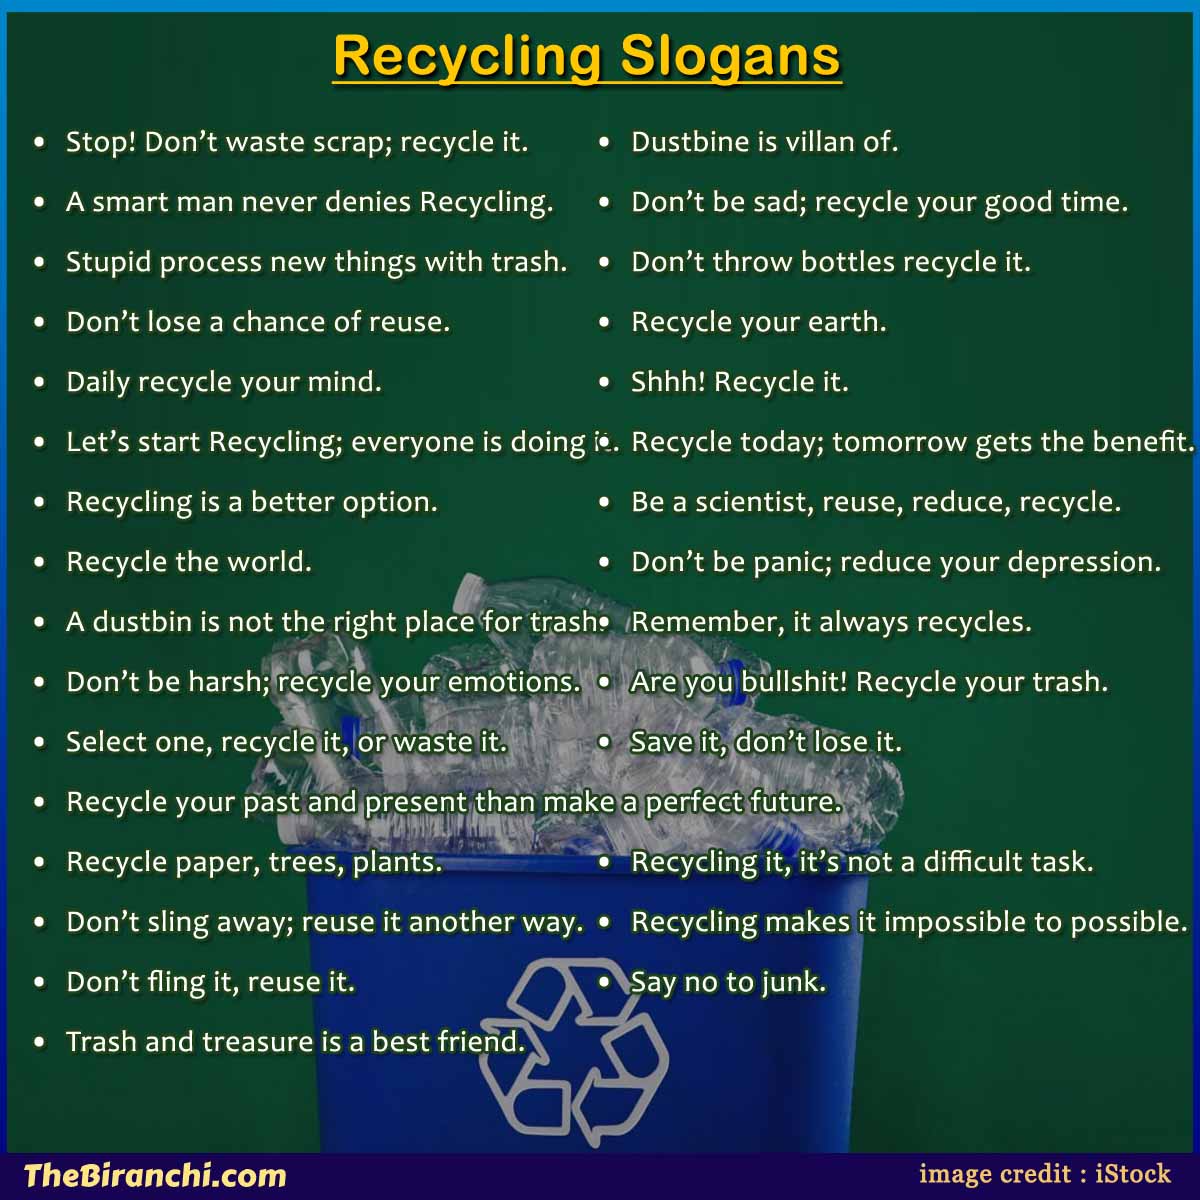 Best-recycling-slogans-taglines-short-quotes-phrases-and-saying